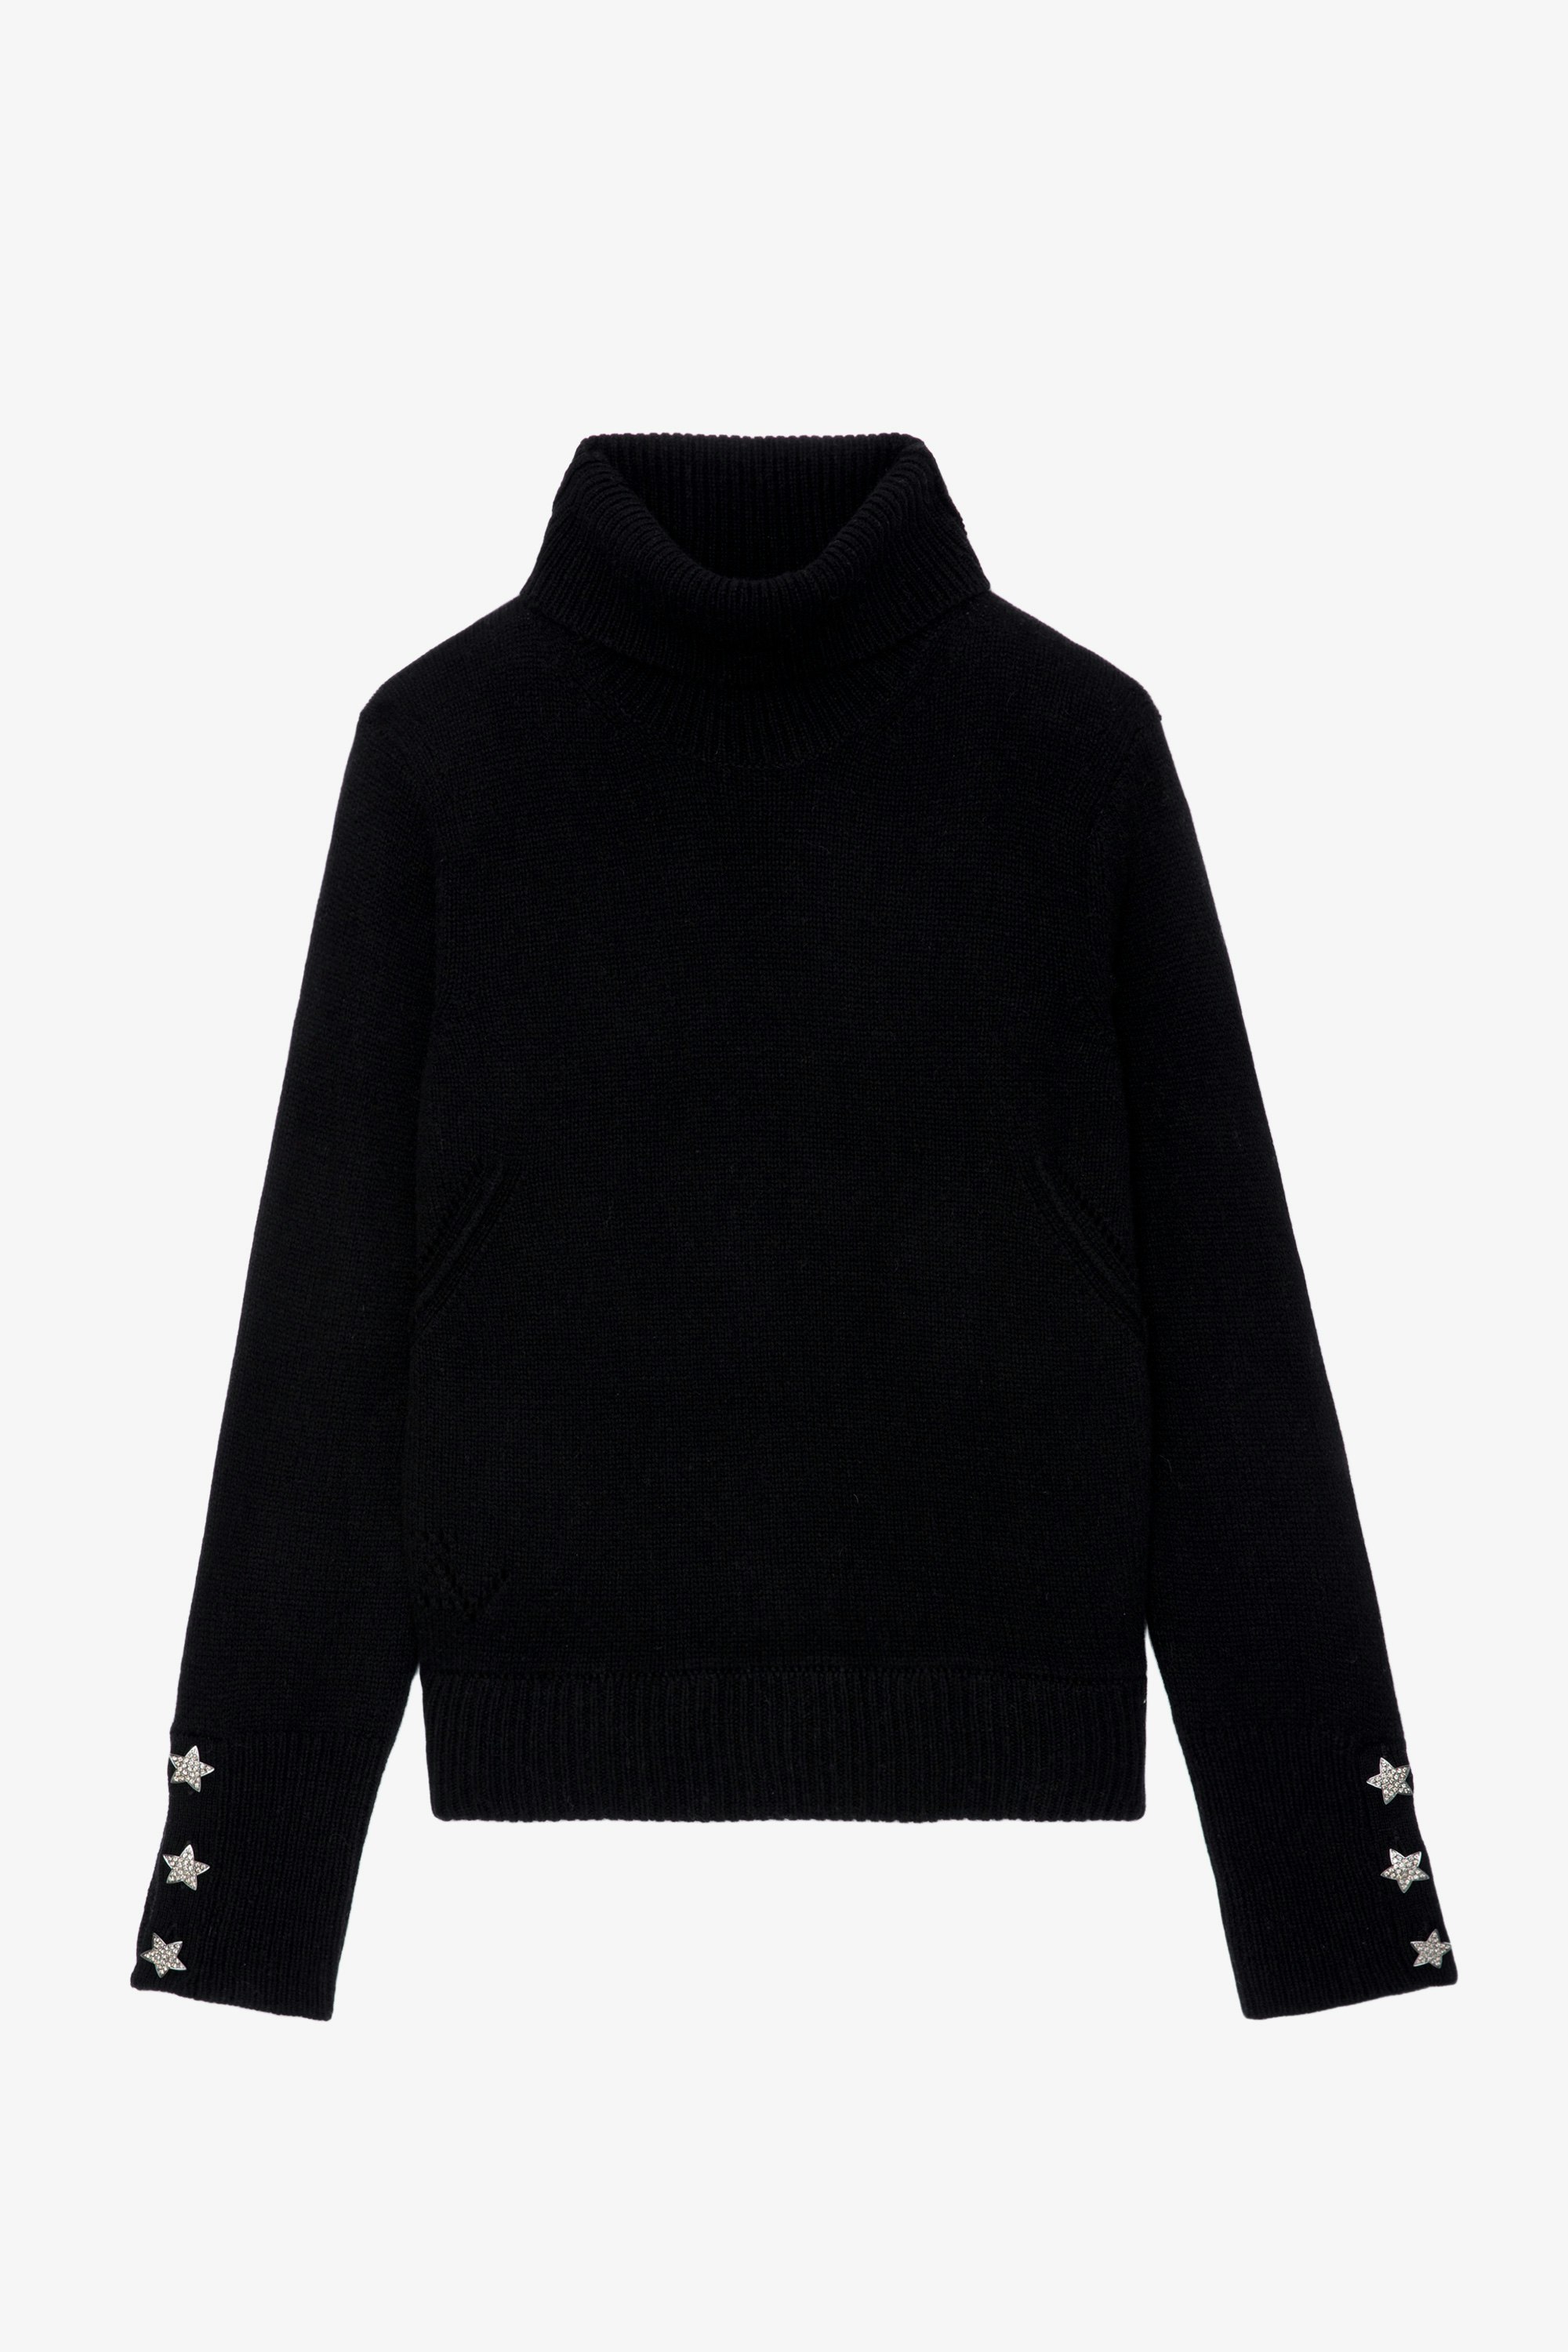 Boxy Jewelled Sweater - Black knit jumper with mock neck and sleeves with rhinestone encrusted star buttons.